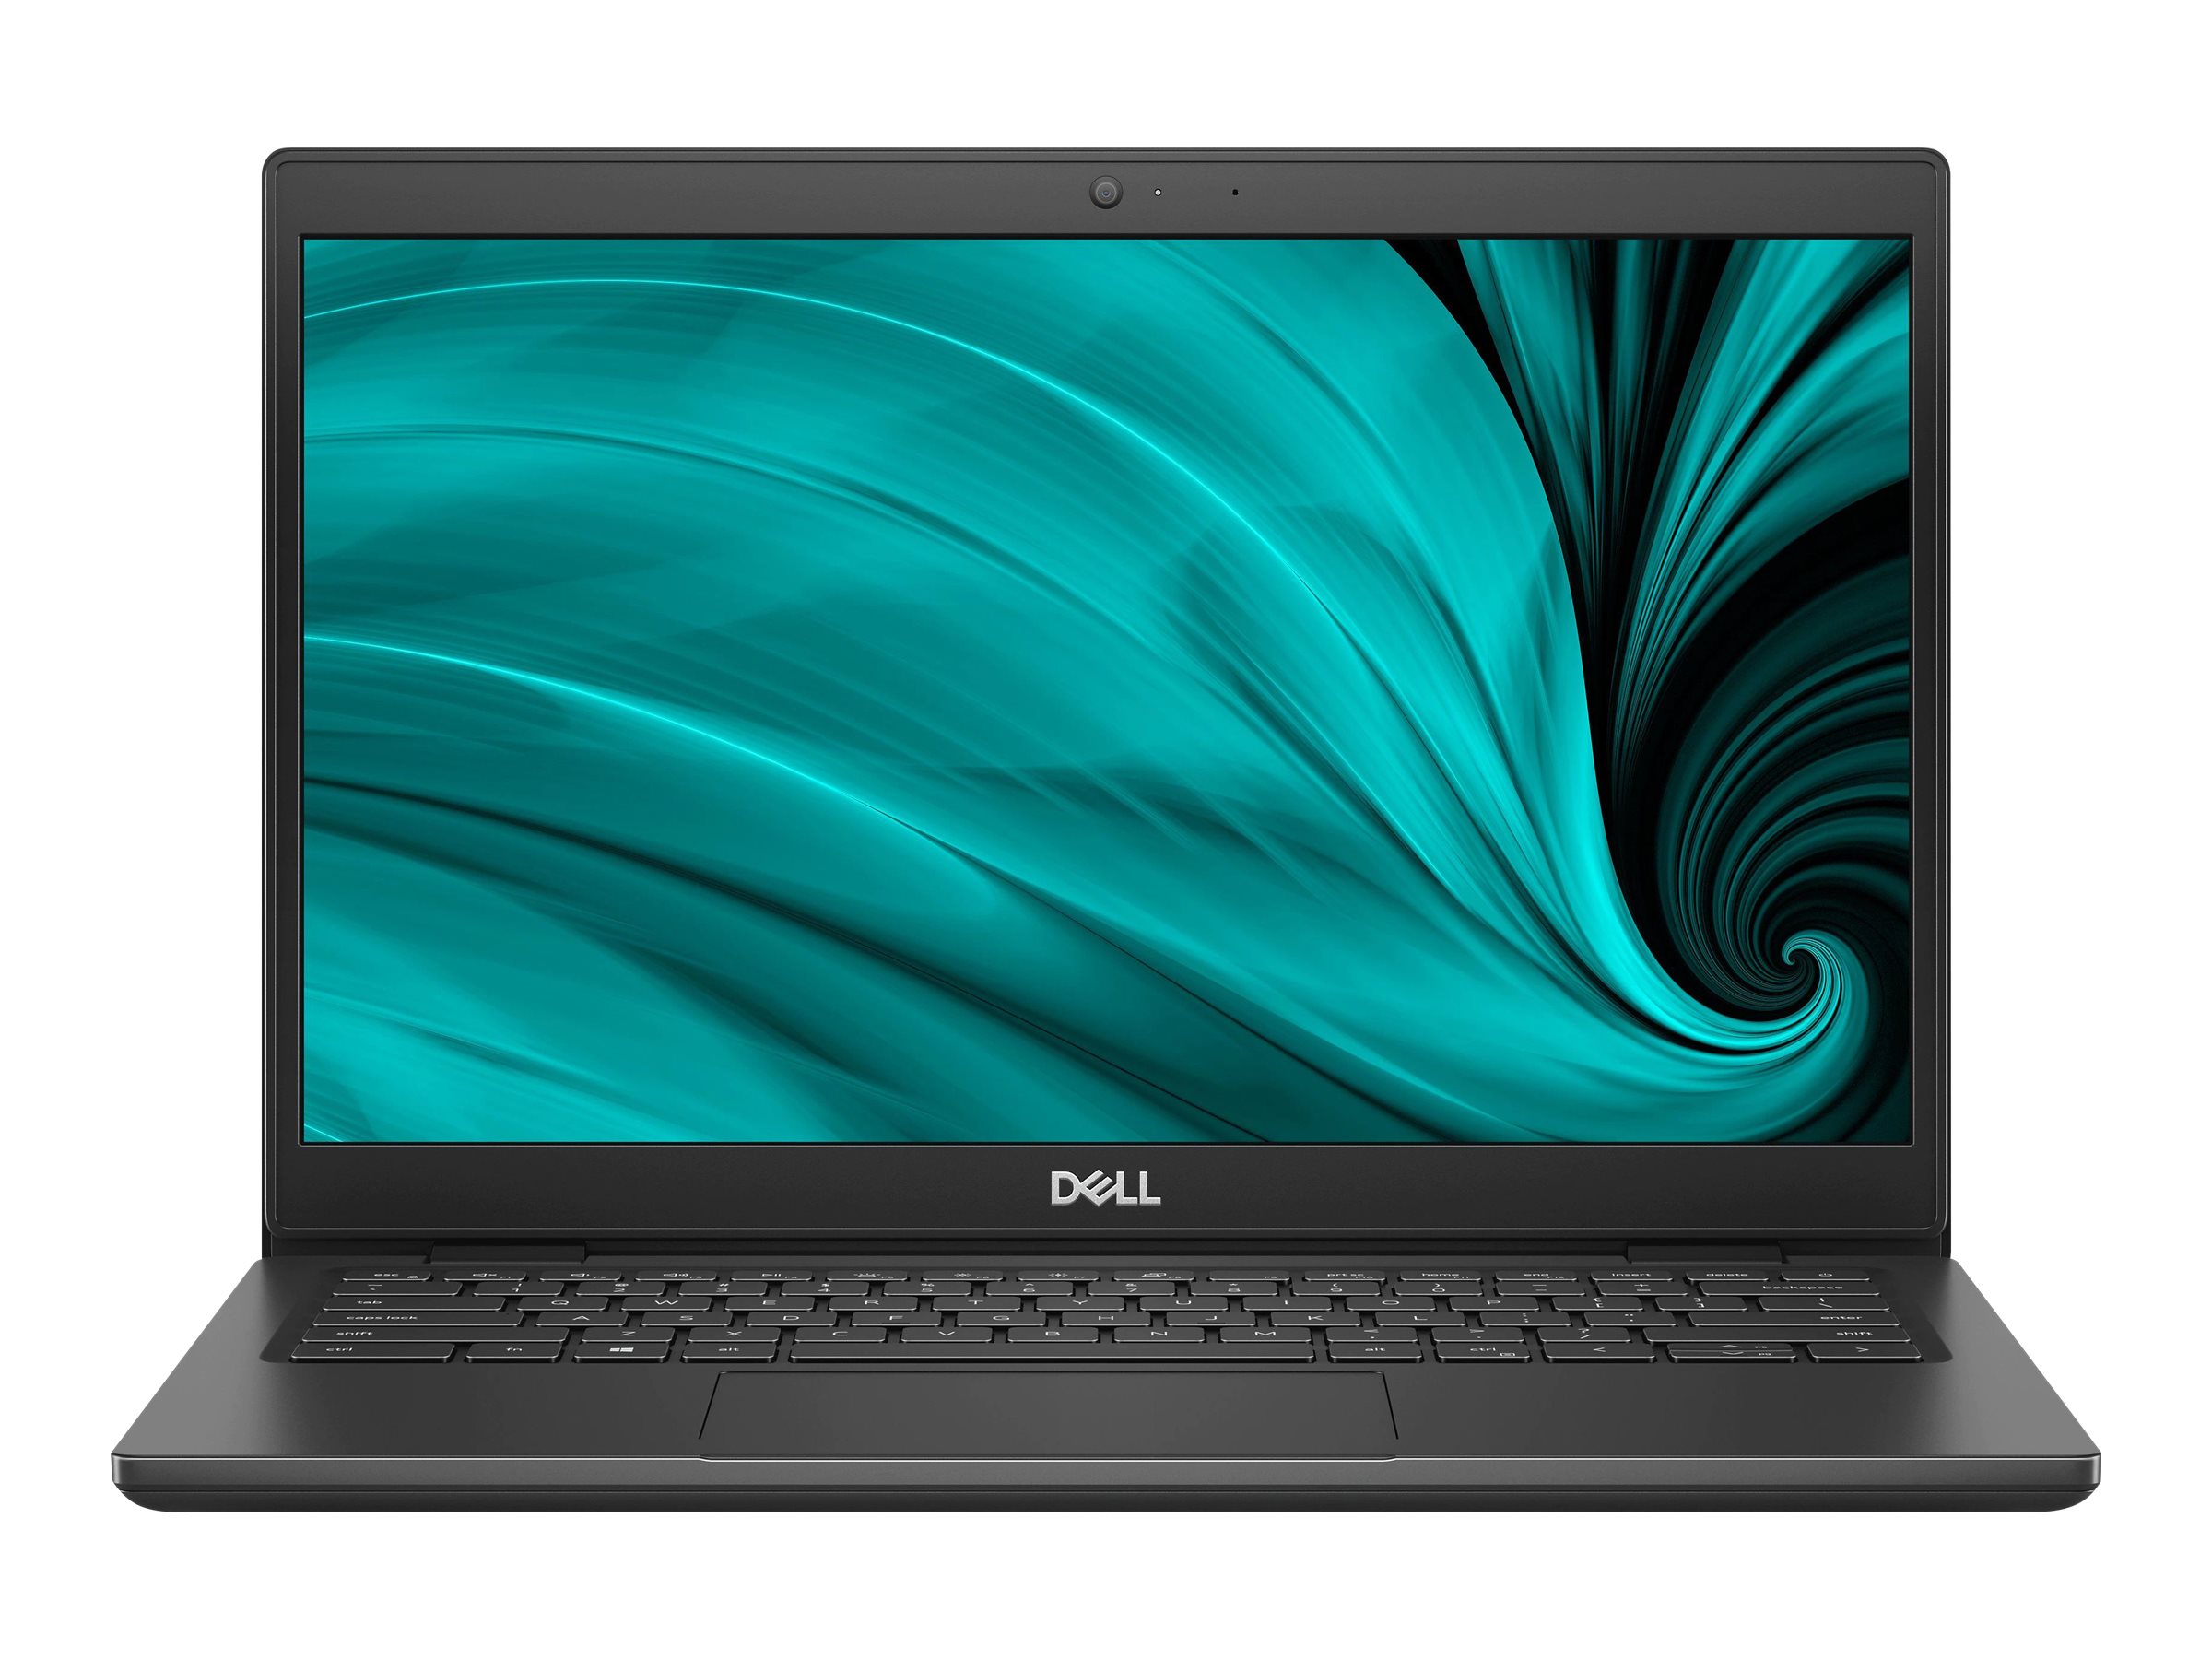 Dell XPS vs Dell Latitude: What's the difference?